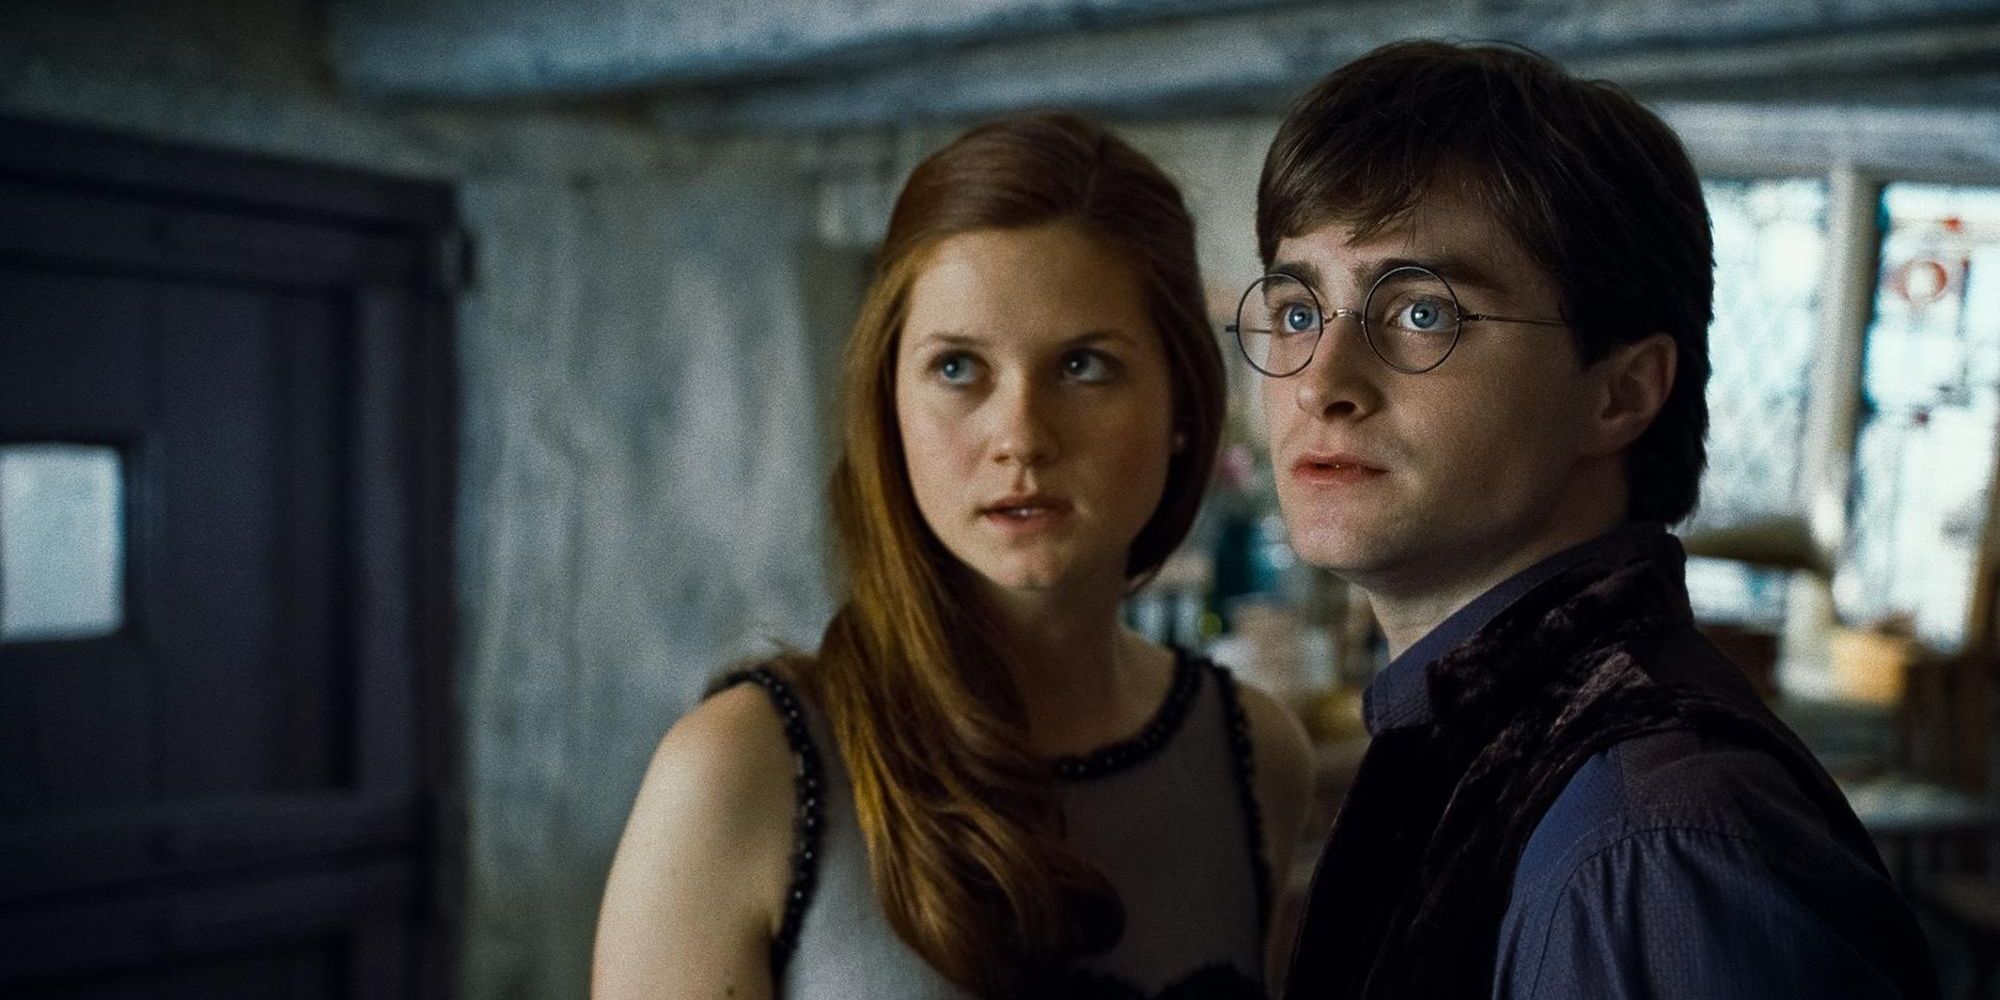 Harry Potter 5 Couples That Are Perfect Together (& 5 That Make No Sense)